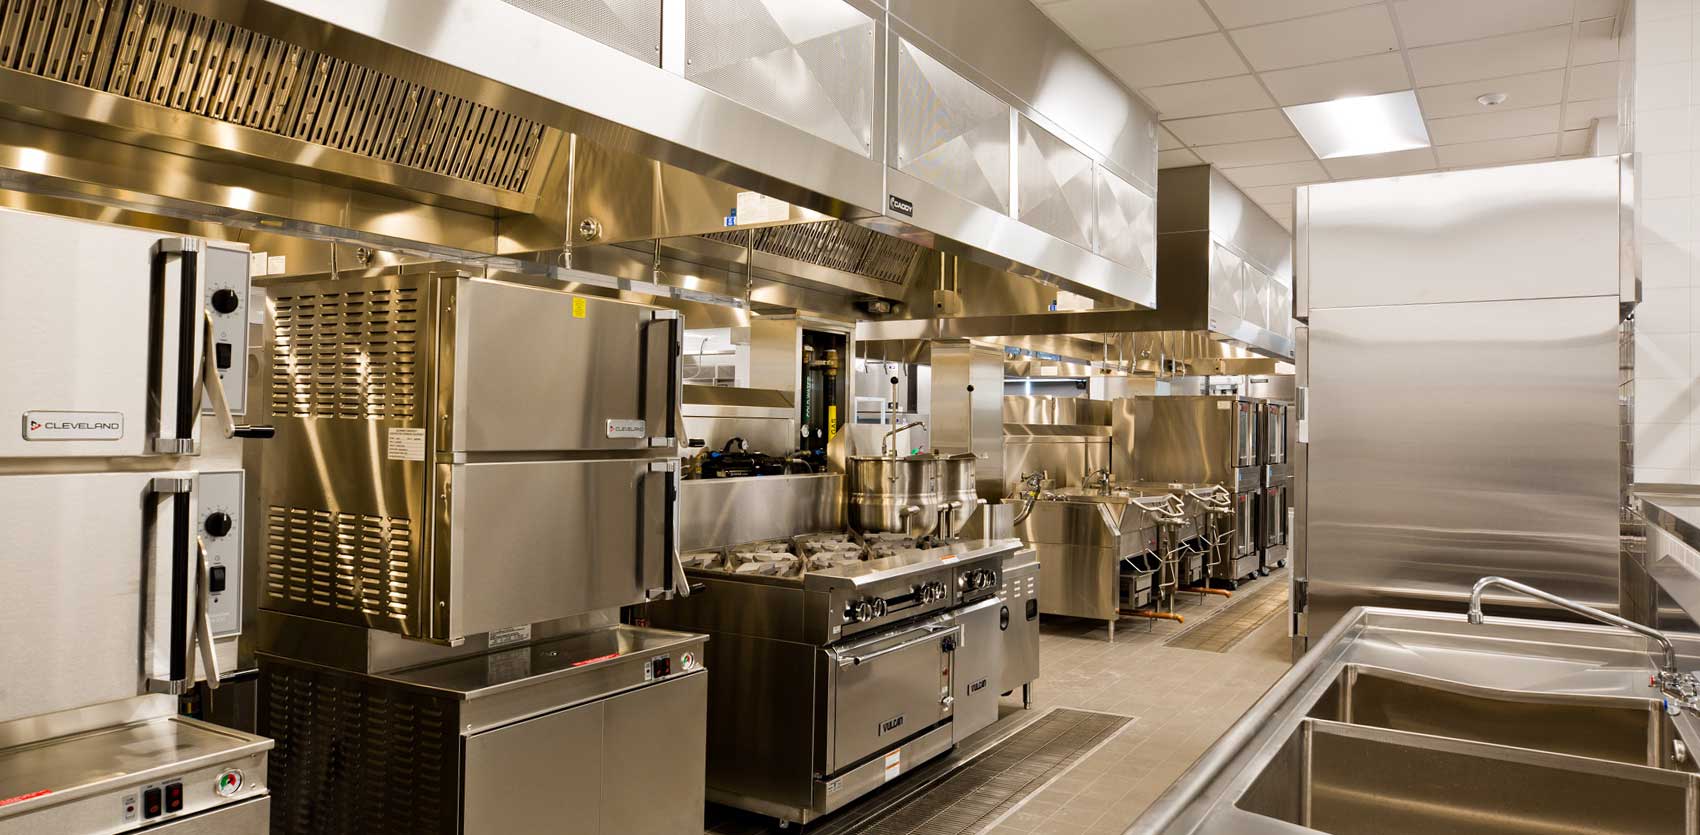 Fort McCoy Dining Facility